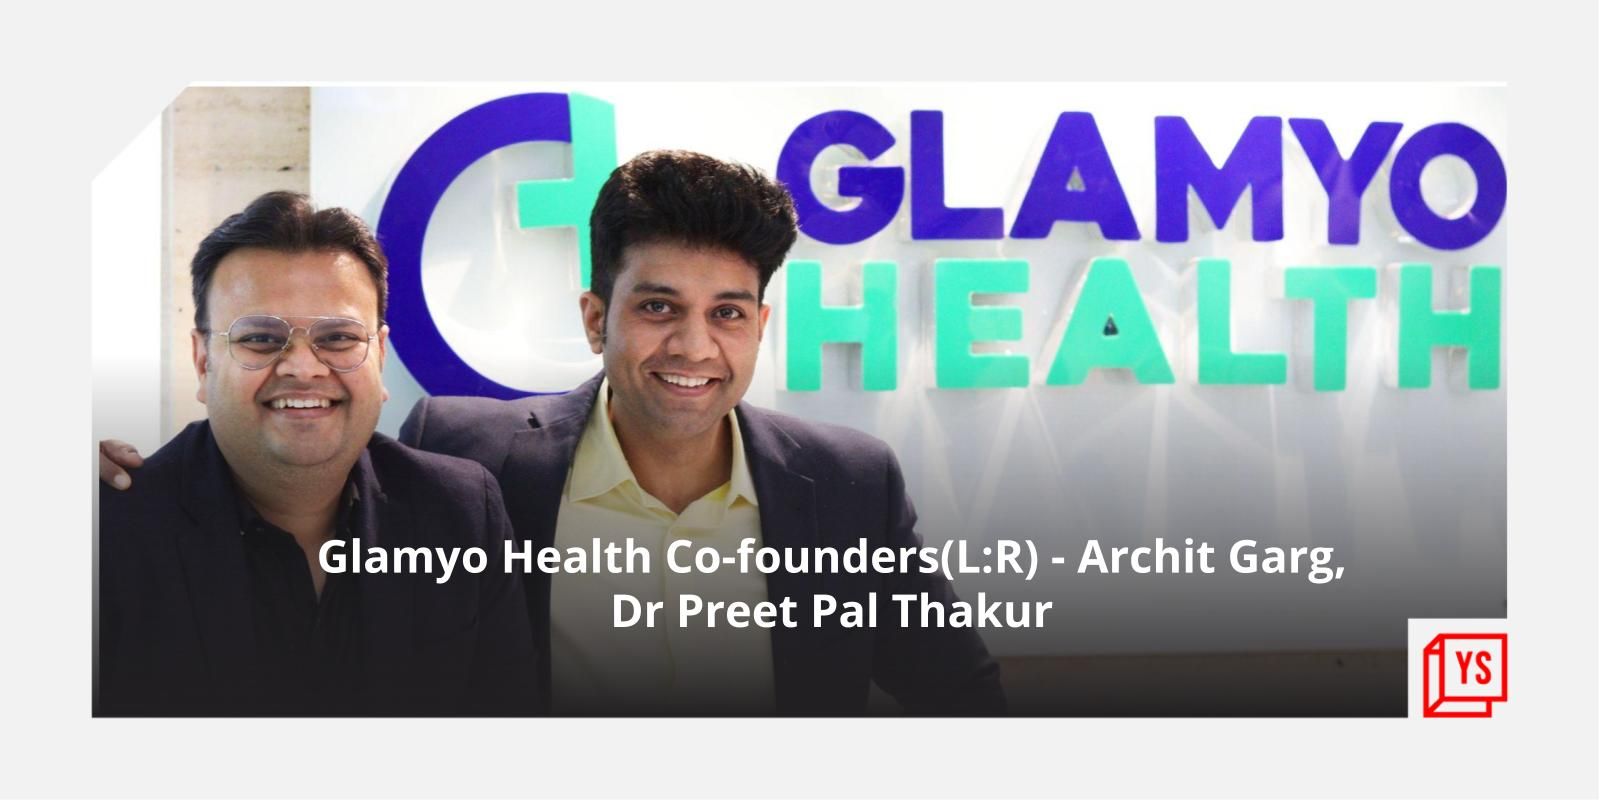 This Delhi-based startup is creating OYO-like healthtech network with 300+ hospitals across 16 cities